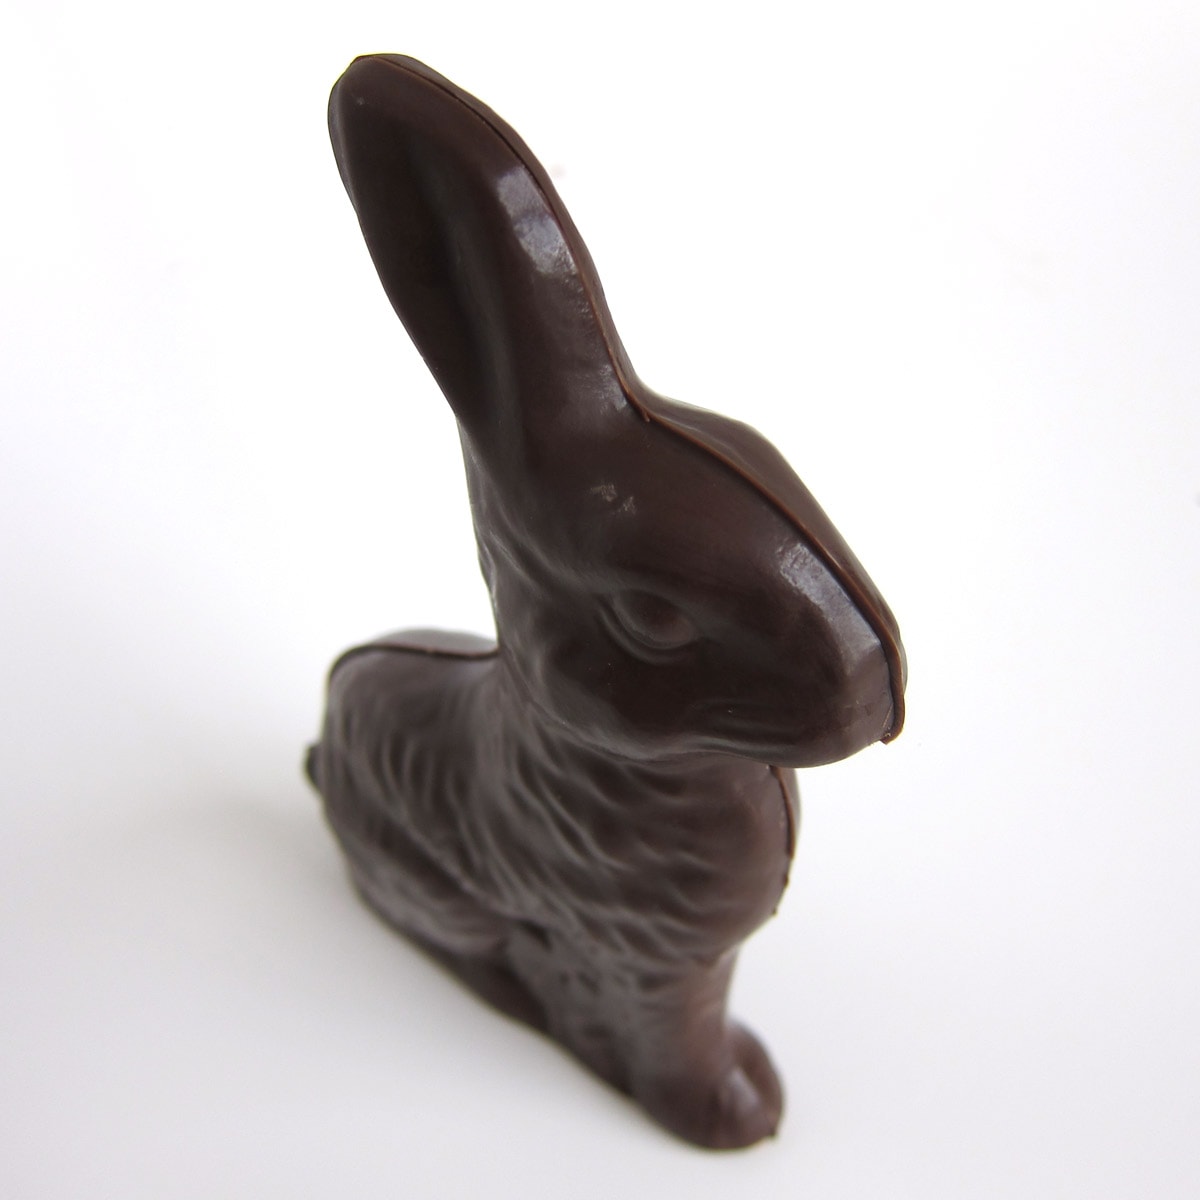 solid chocolate bunny standing on white table